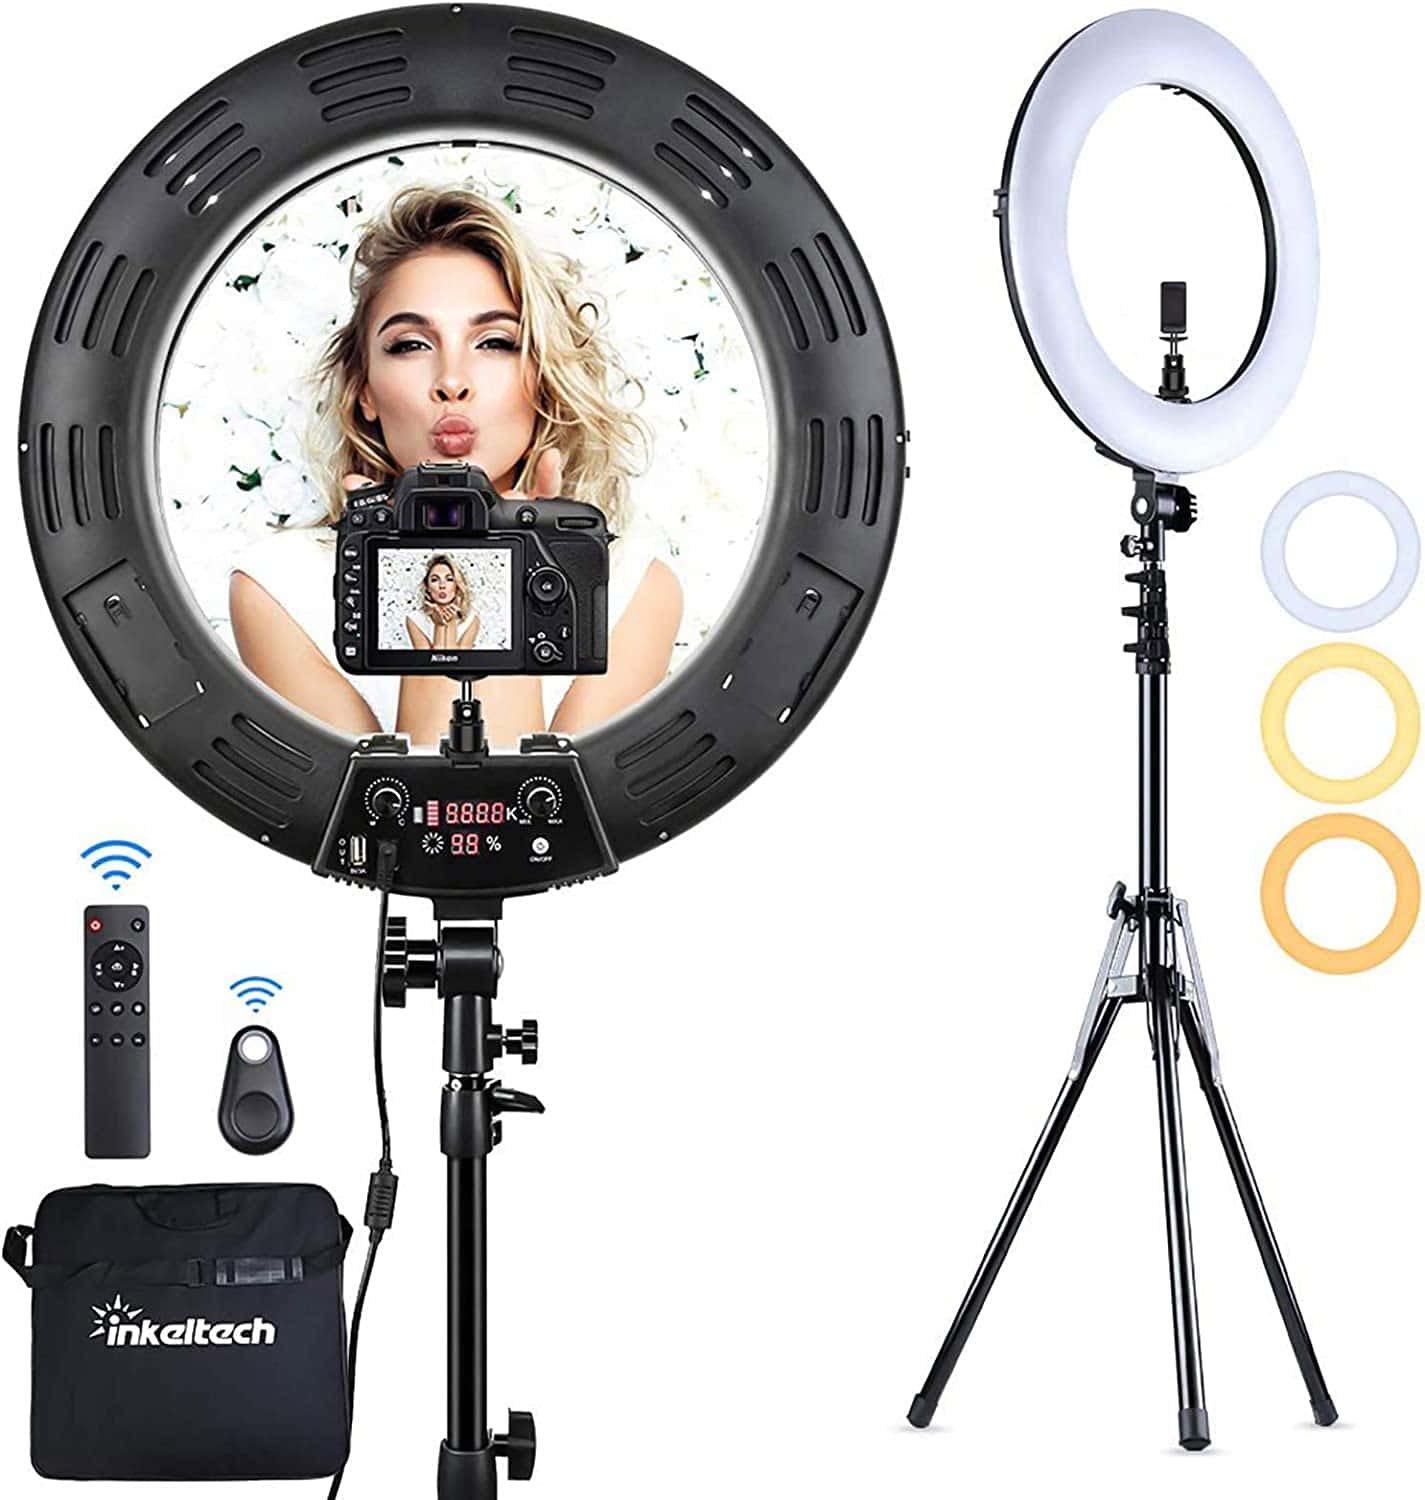 A Ring Light With A Remote And A Tripod